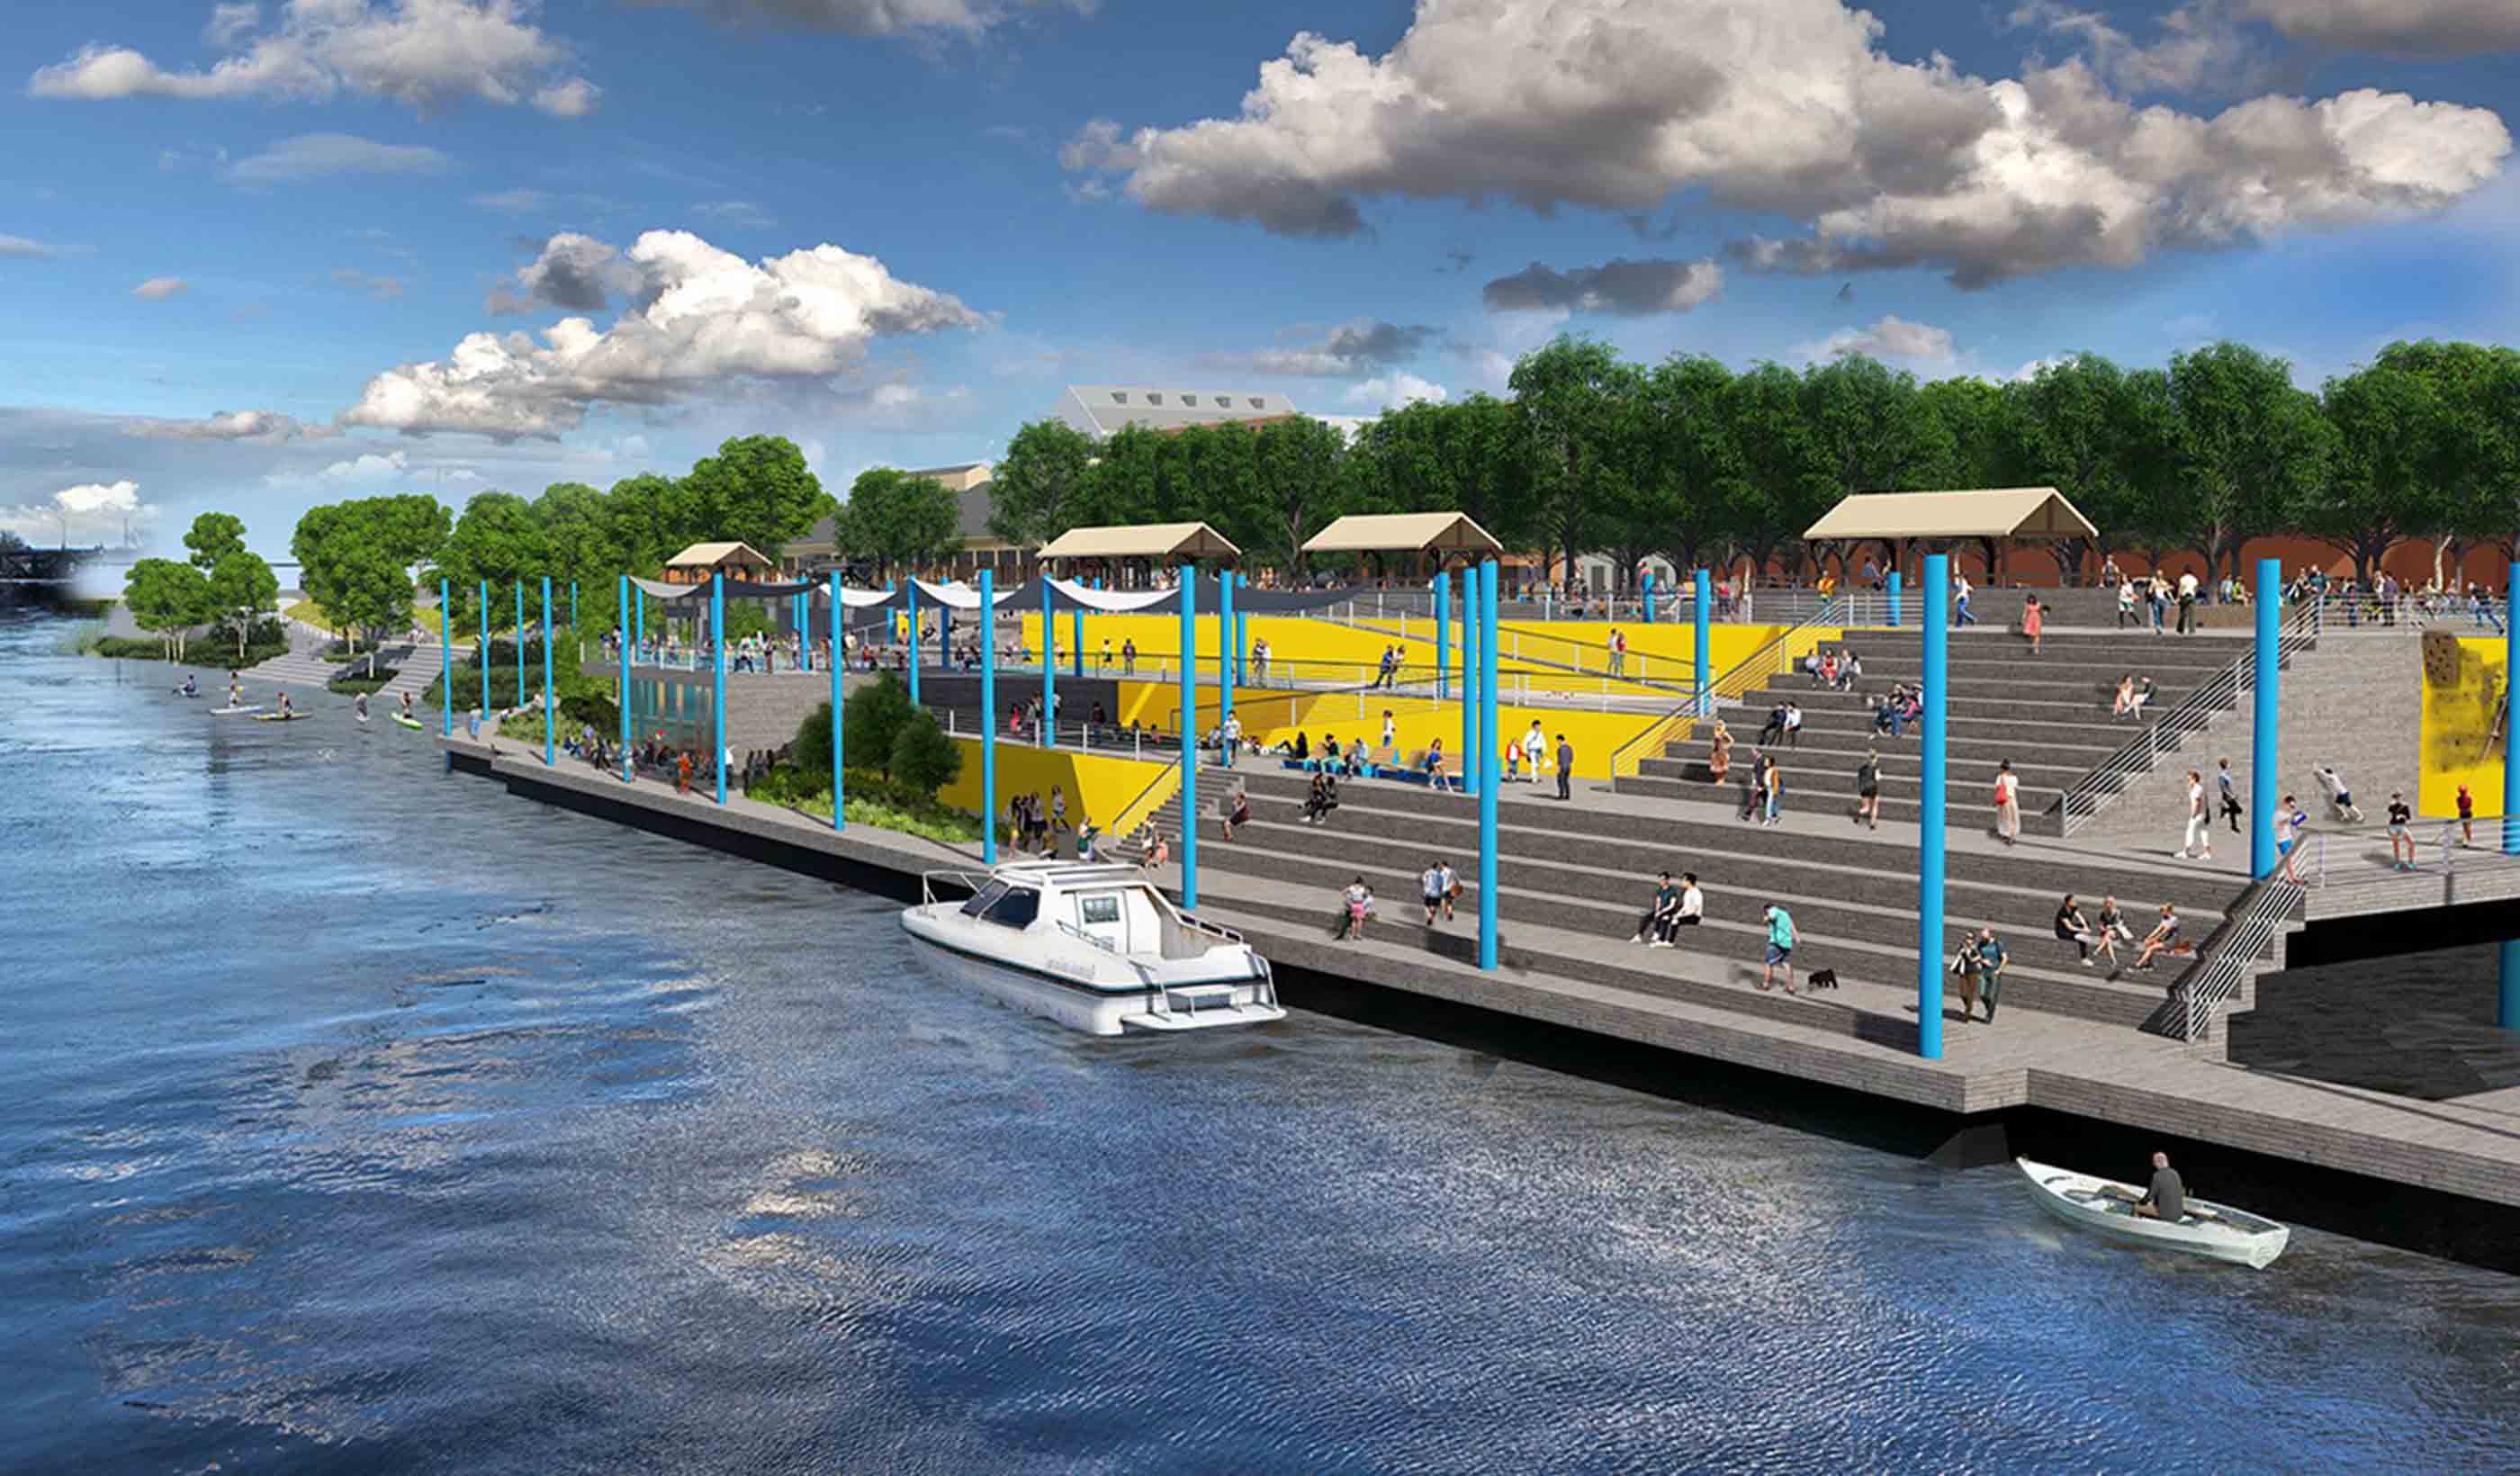 From the Design Quarterly: 6 approaches to waterfront revitalization